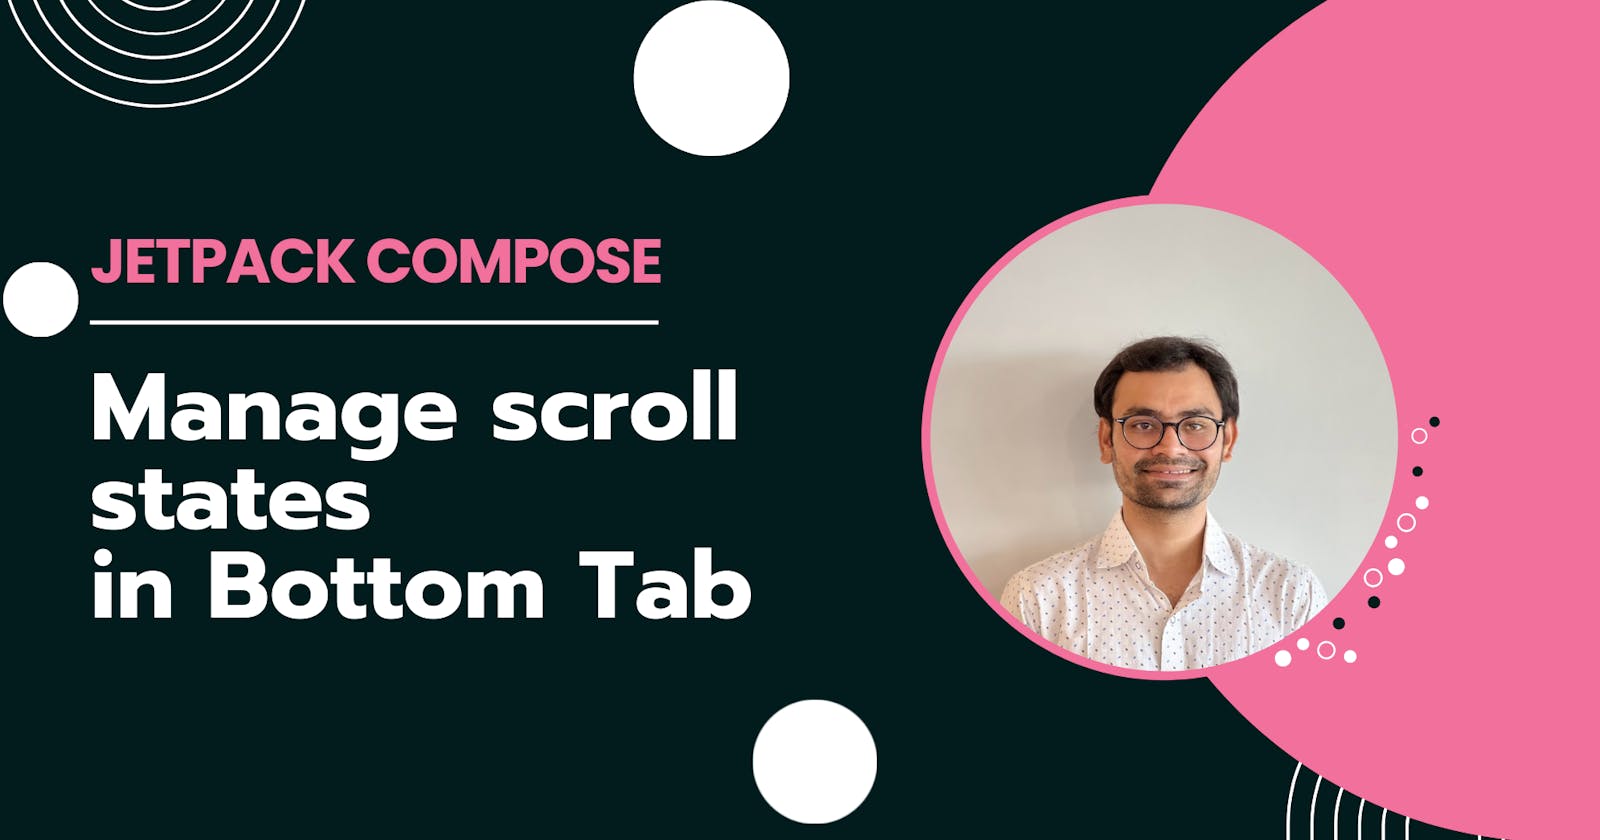 How to manage scroll state in a bottom tab in Jetpack compose